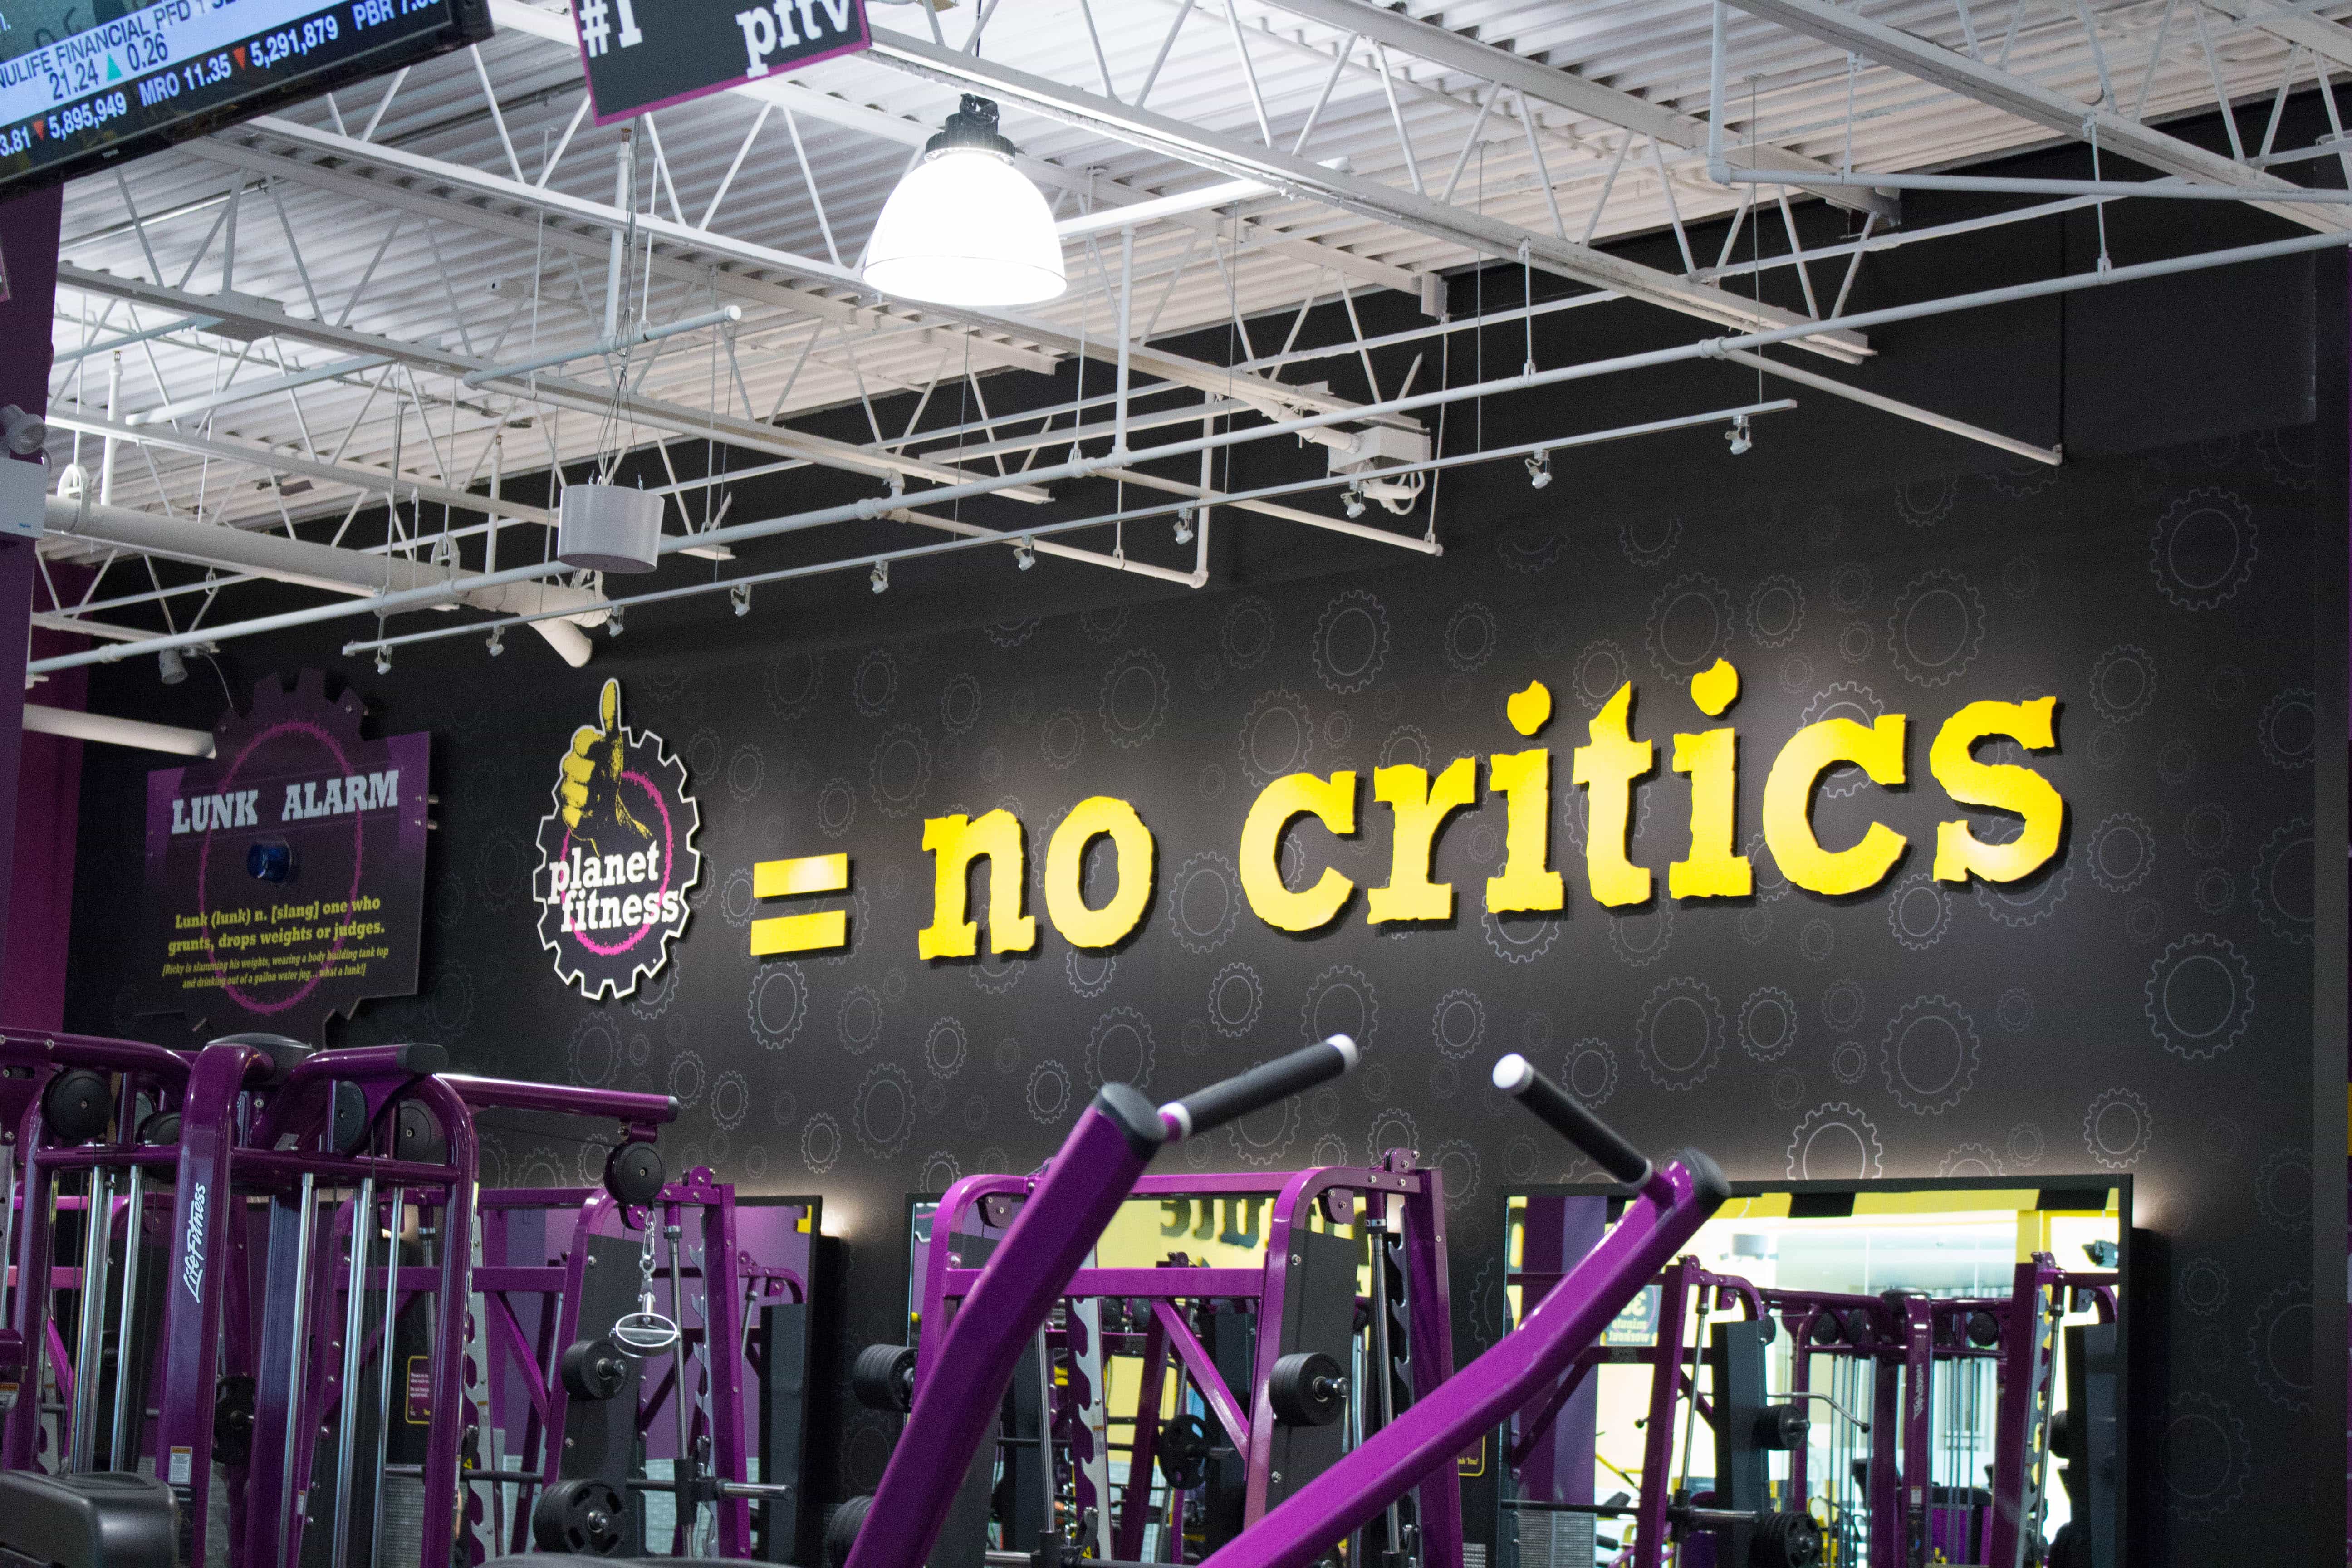 Are you looking for a no frills gym with low rates in Toronto? Check out the new Planet Fitness location at Gerrard Square!